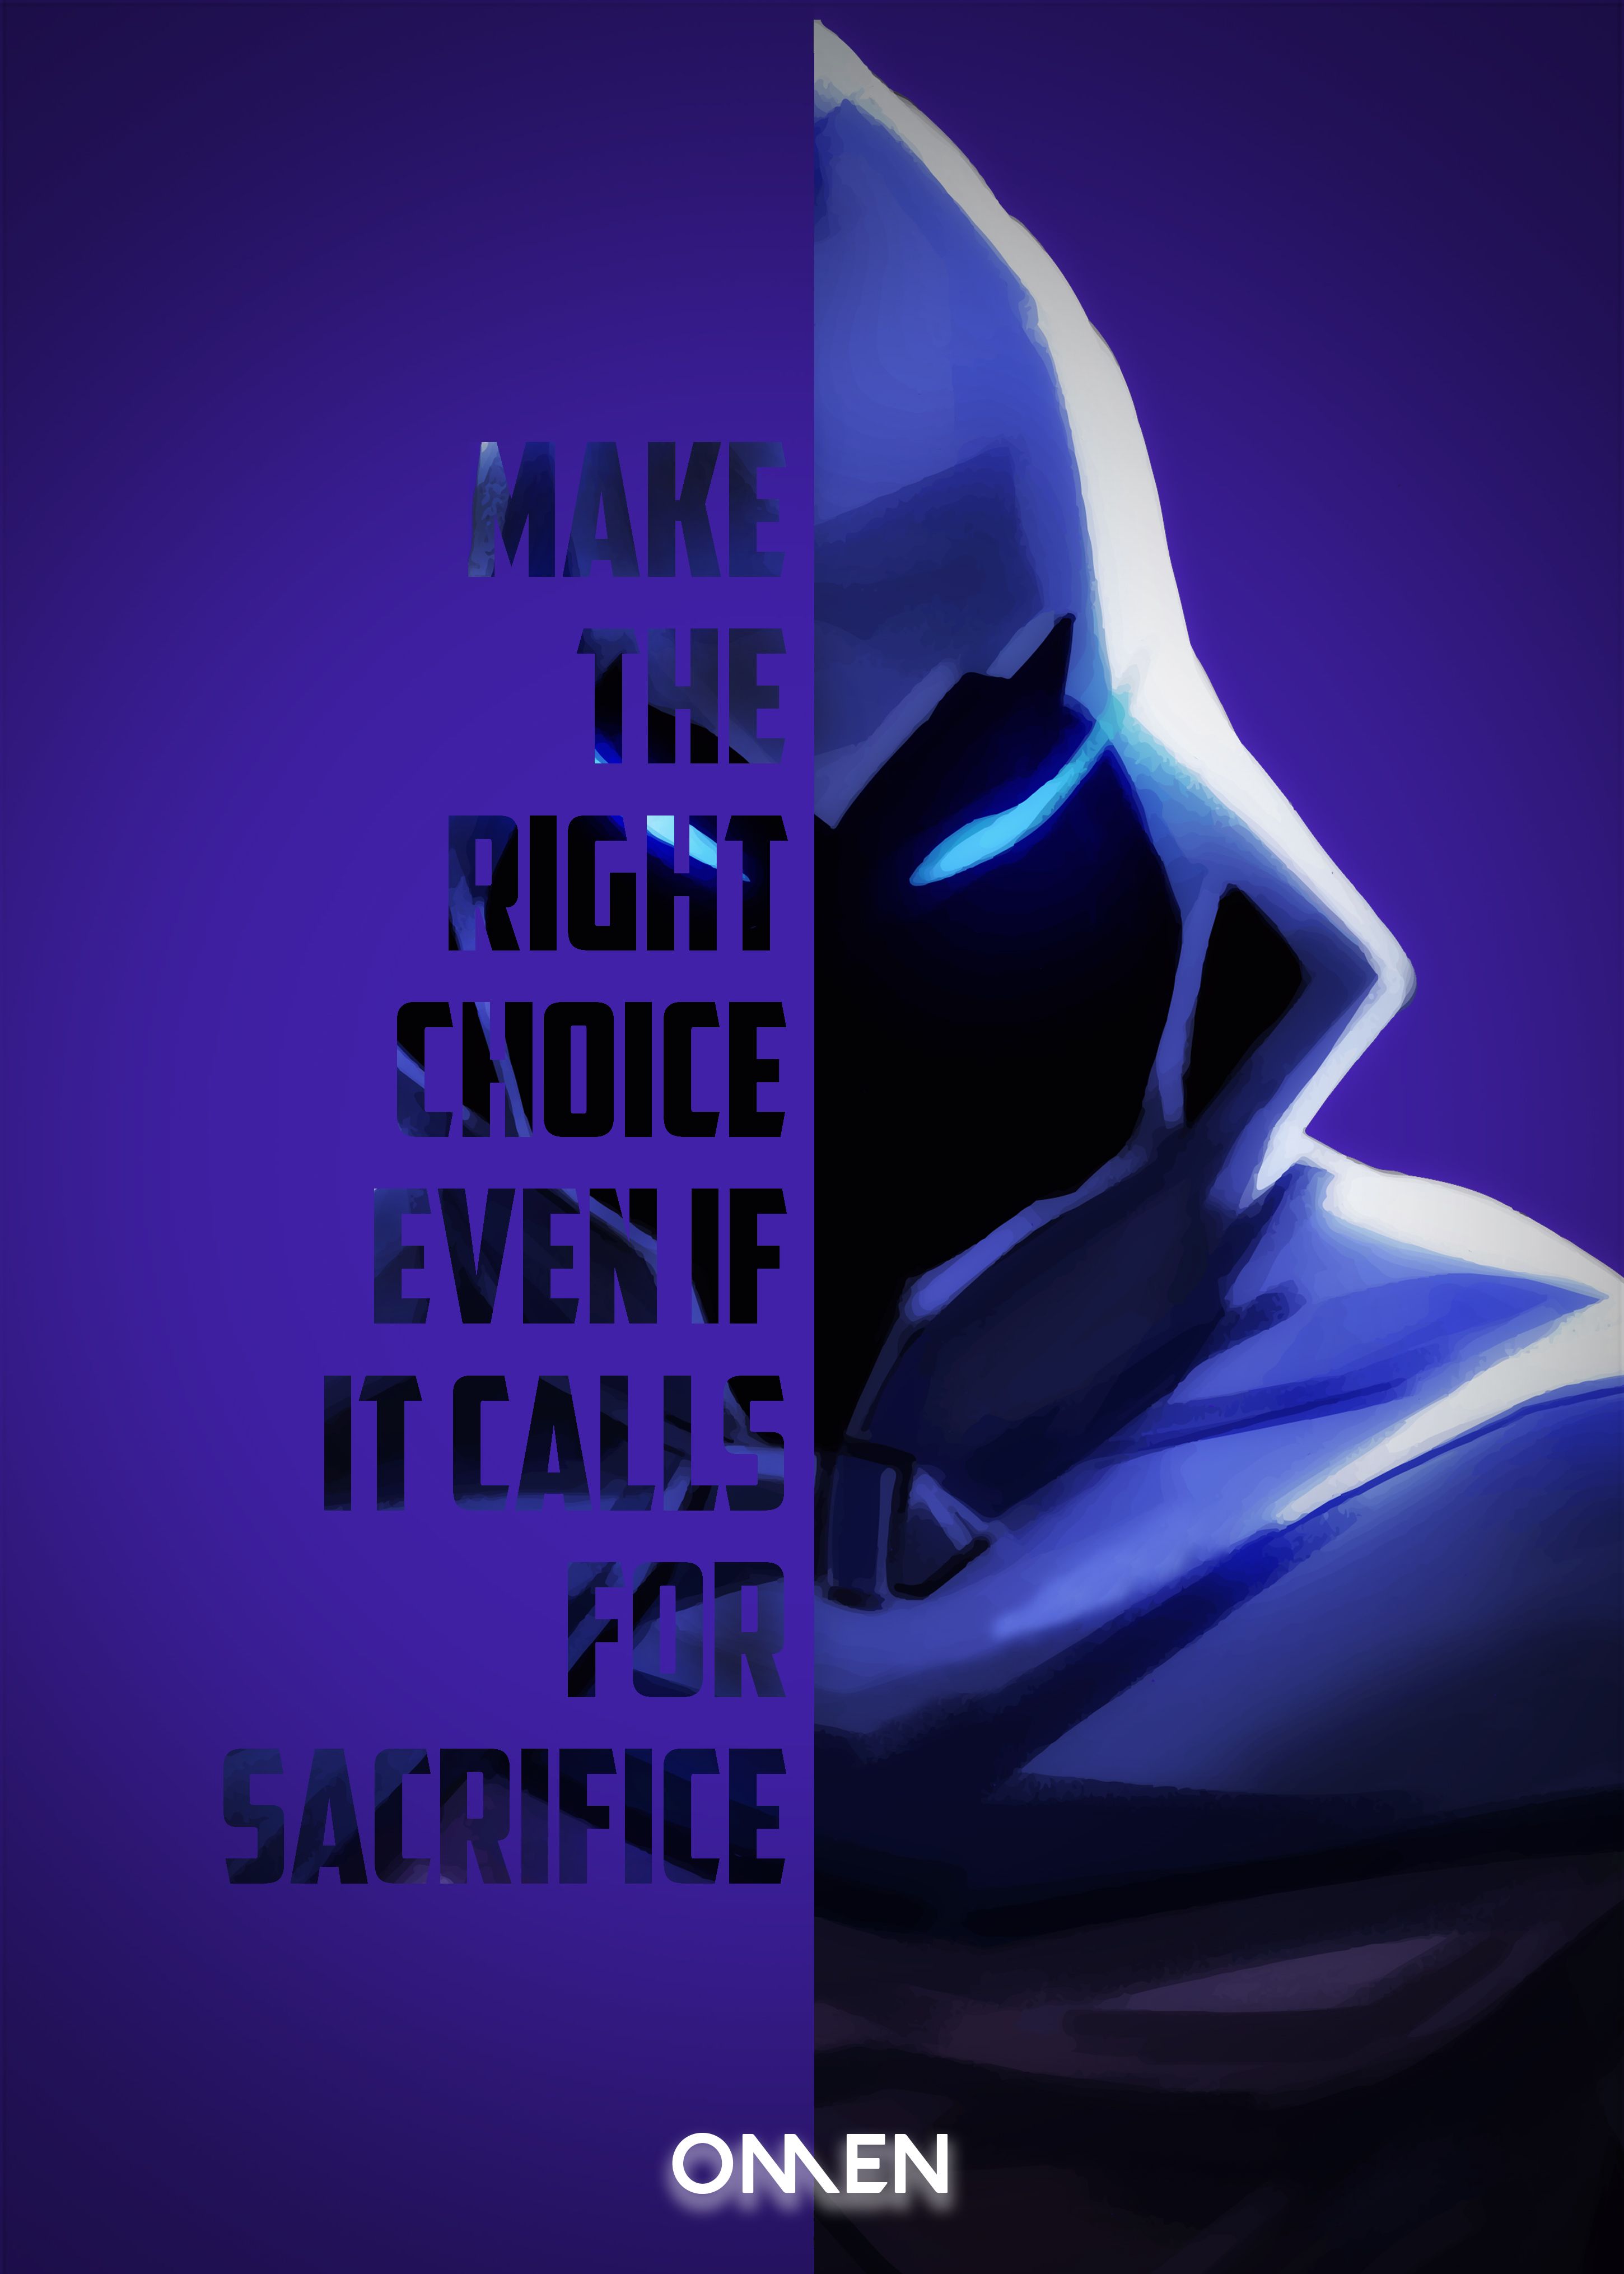 Omen Agent. Gaming wallpaper, League of legends characters, Morning inspirational quotes